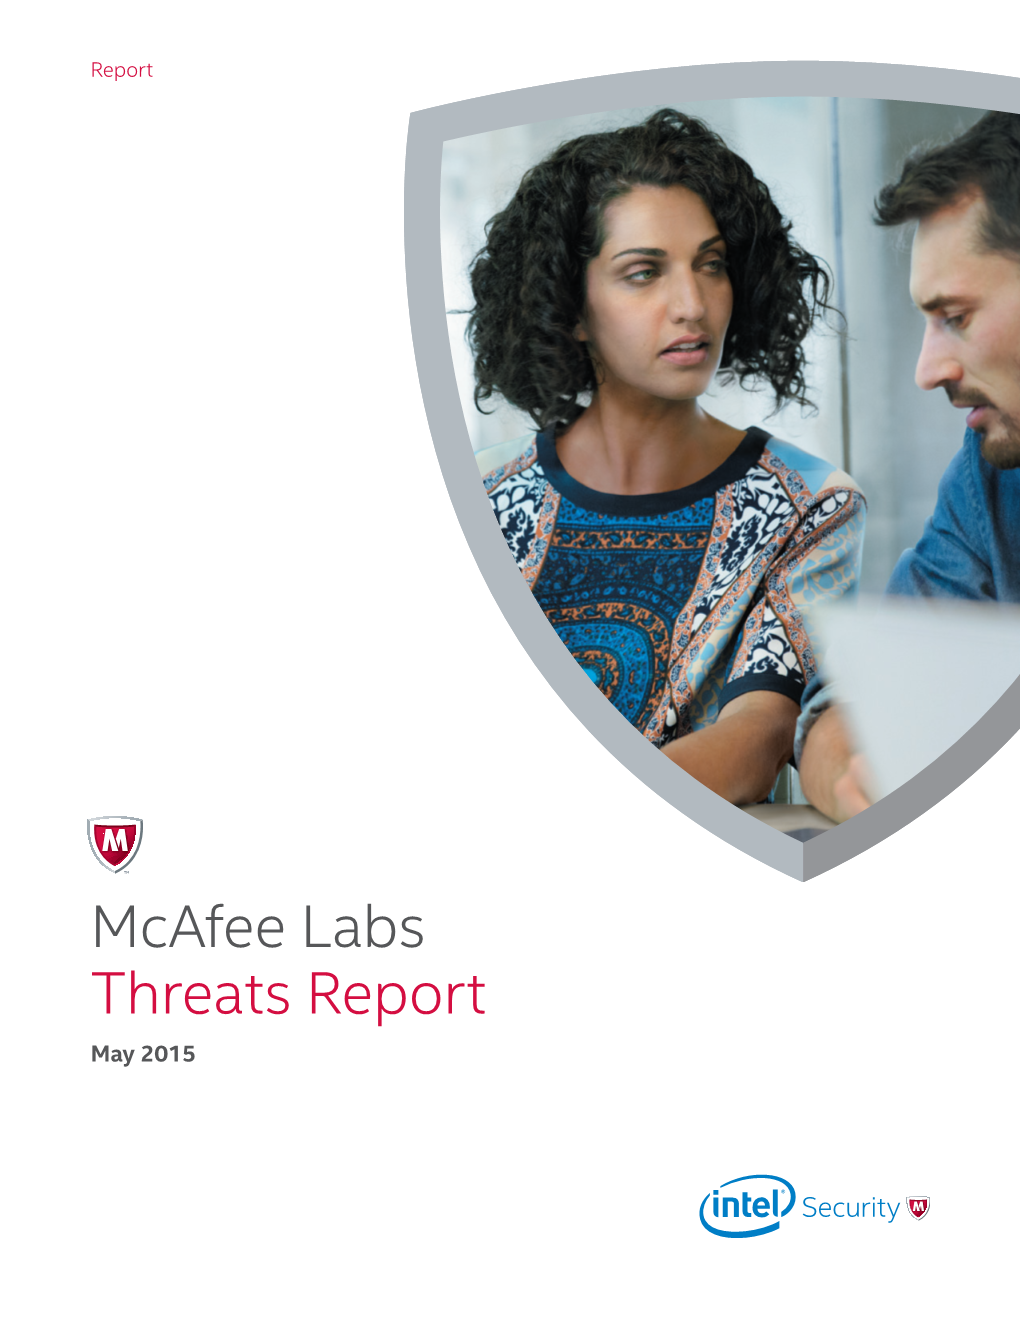 Mcafee Labs Threats Report May 2015 Mcafee Labs Saw Almost Twice the Number of Ransomware Samples in Q1 Than in Any Other Quarter